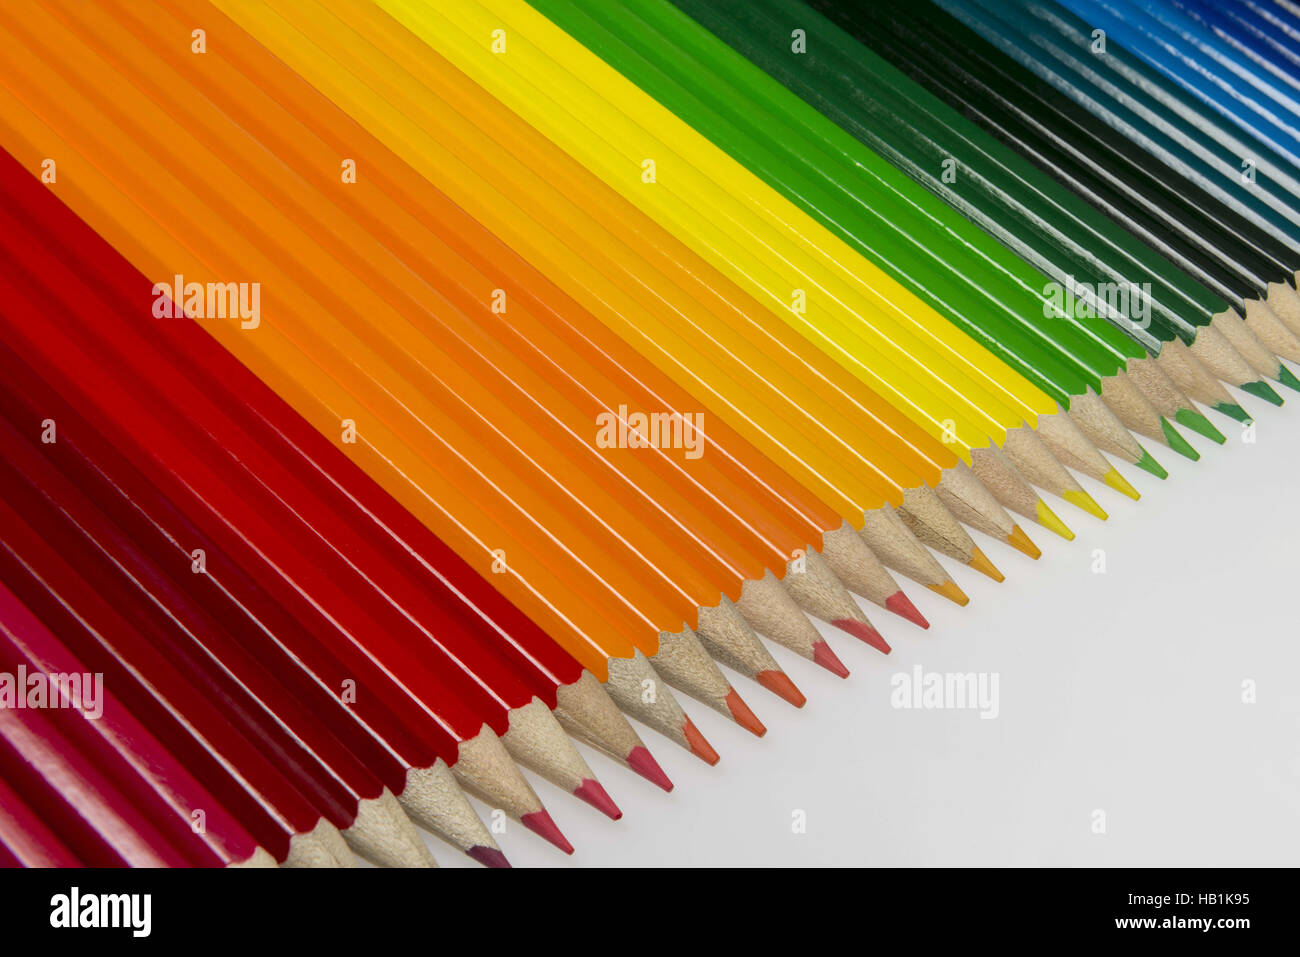 collection of colored wooden pencils Stock Photo